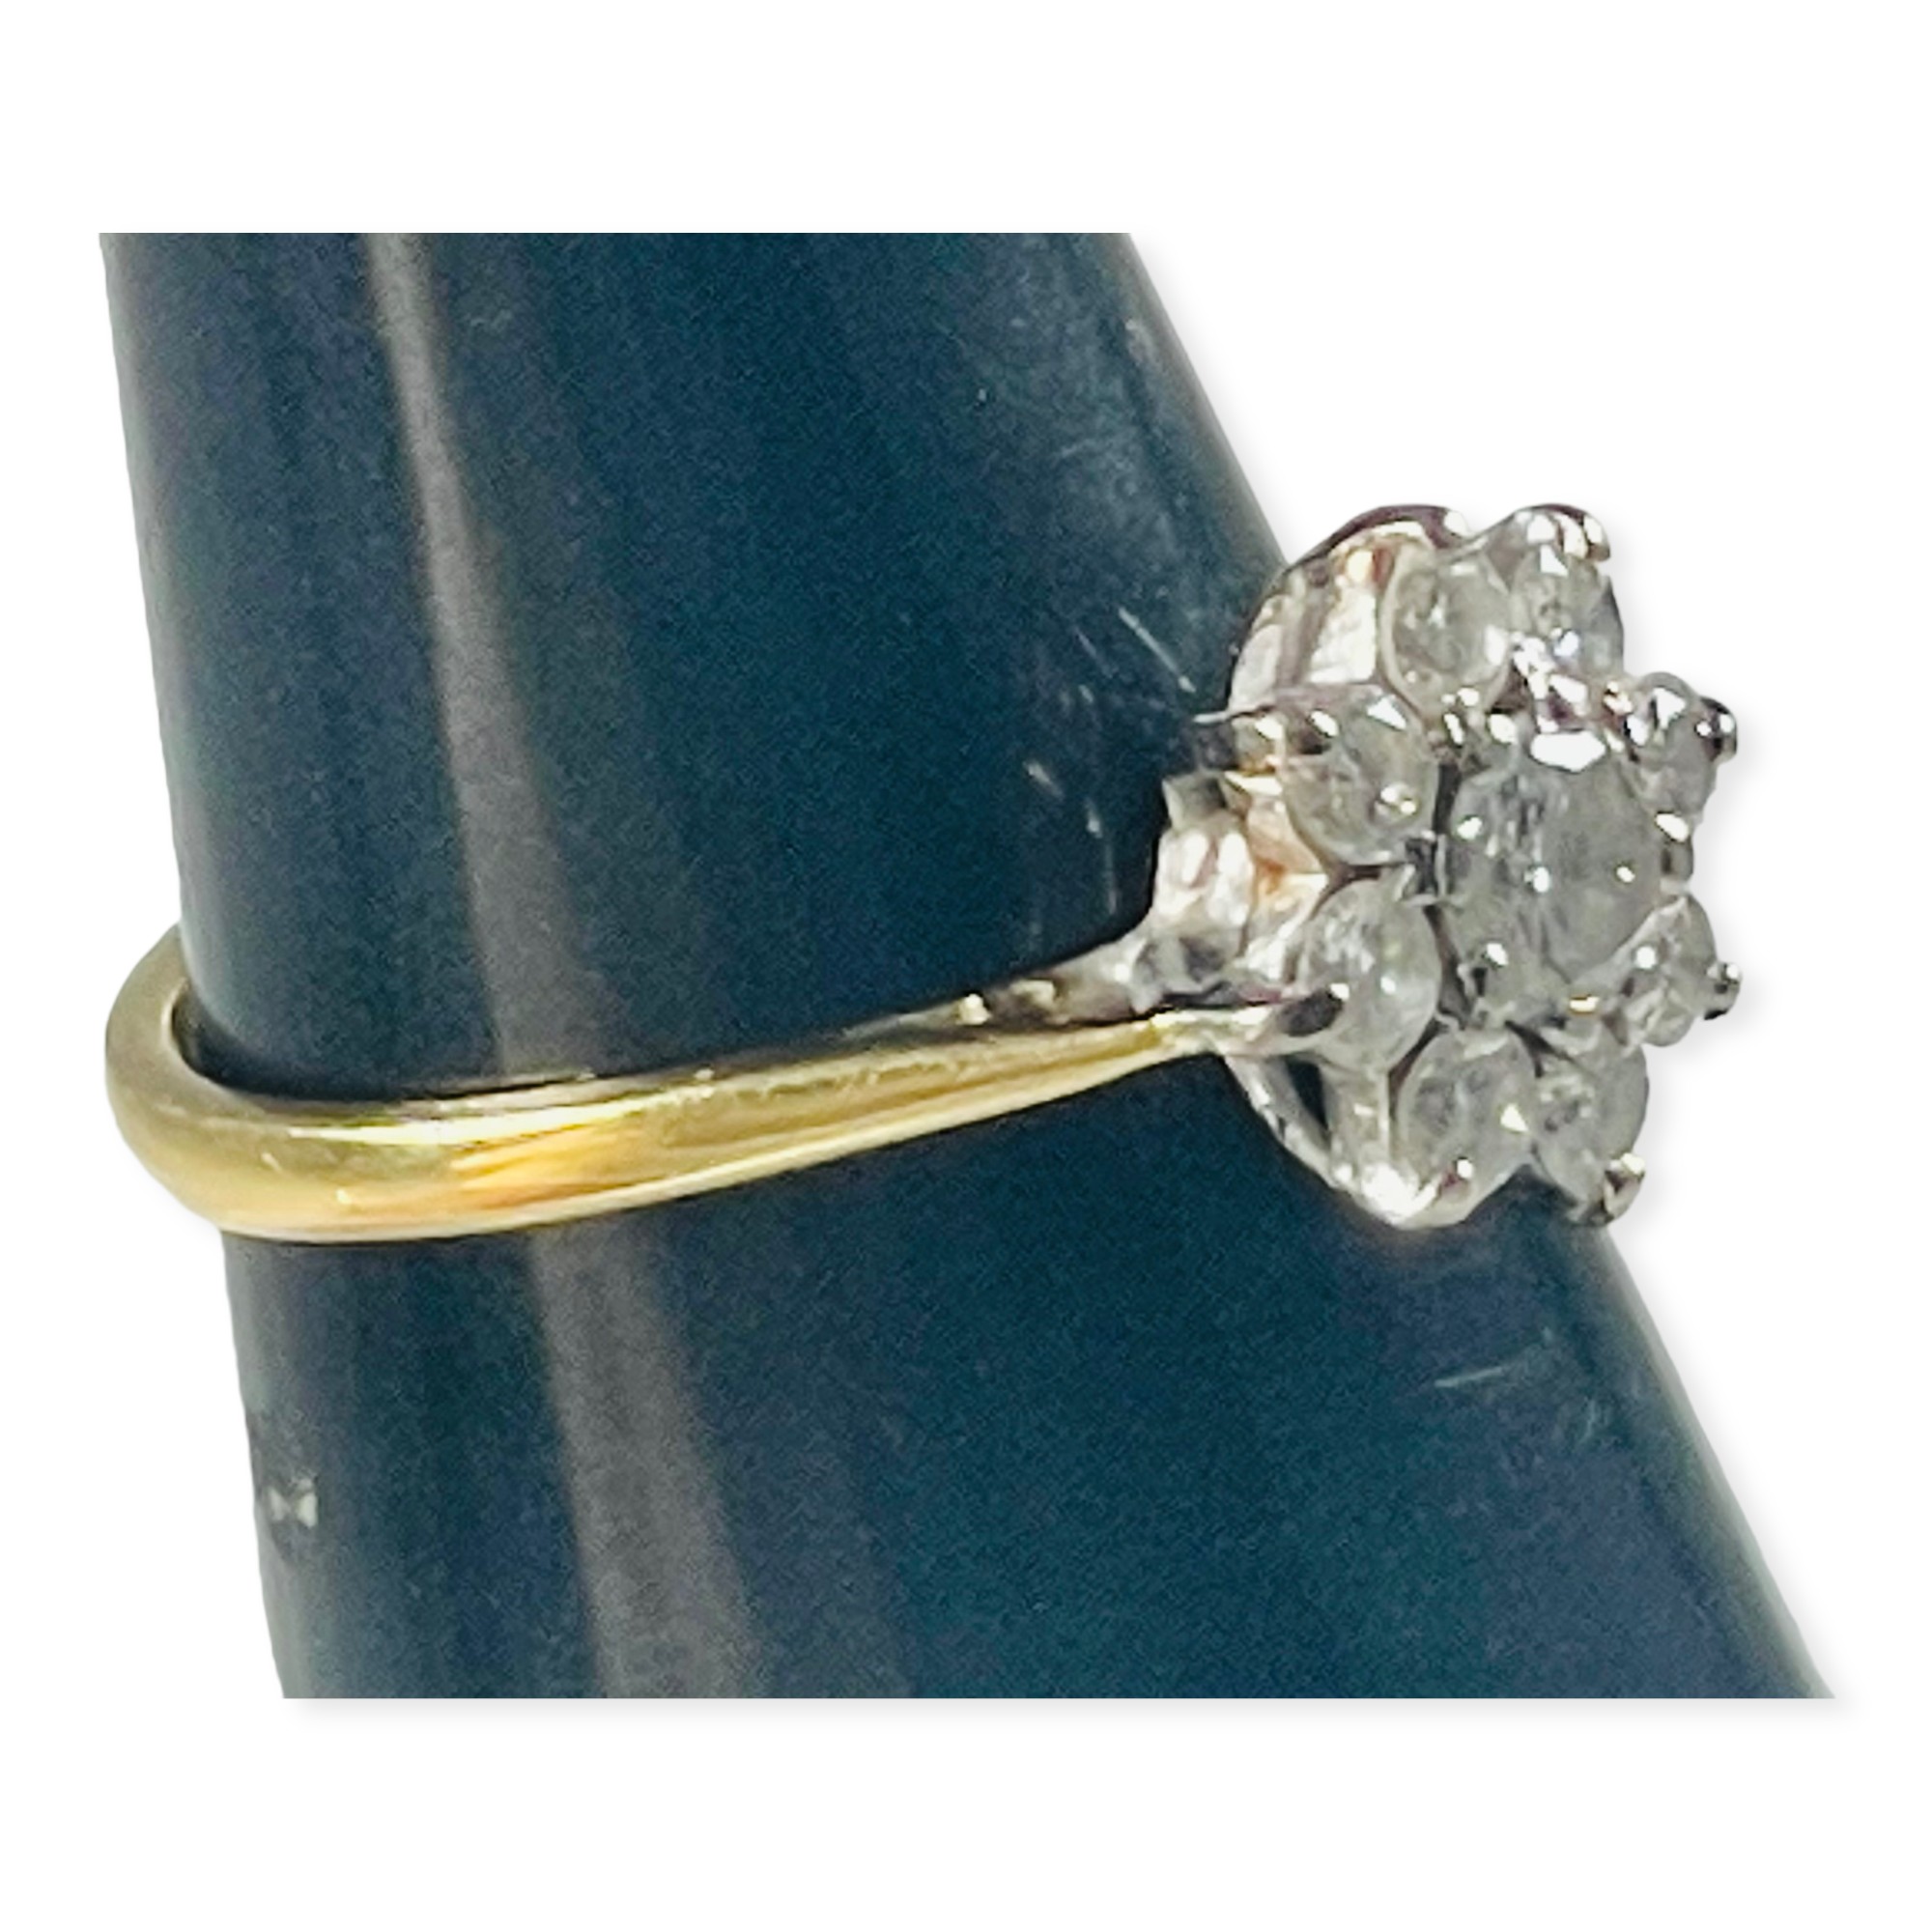 An 18ct yellow gold diamond ring, set with 9 x round brilliant cut diamonds in a daisy cluster - Image 4 of 4